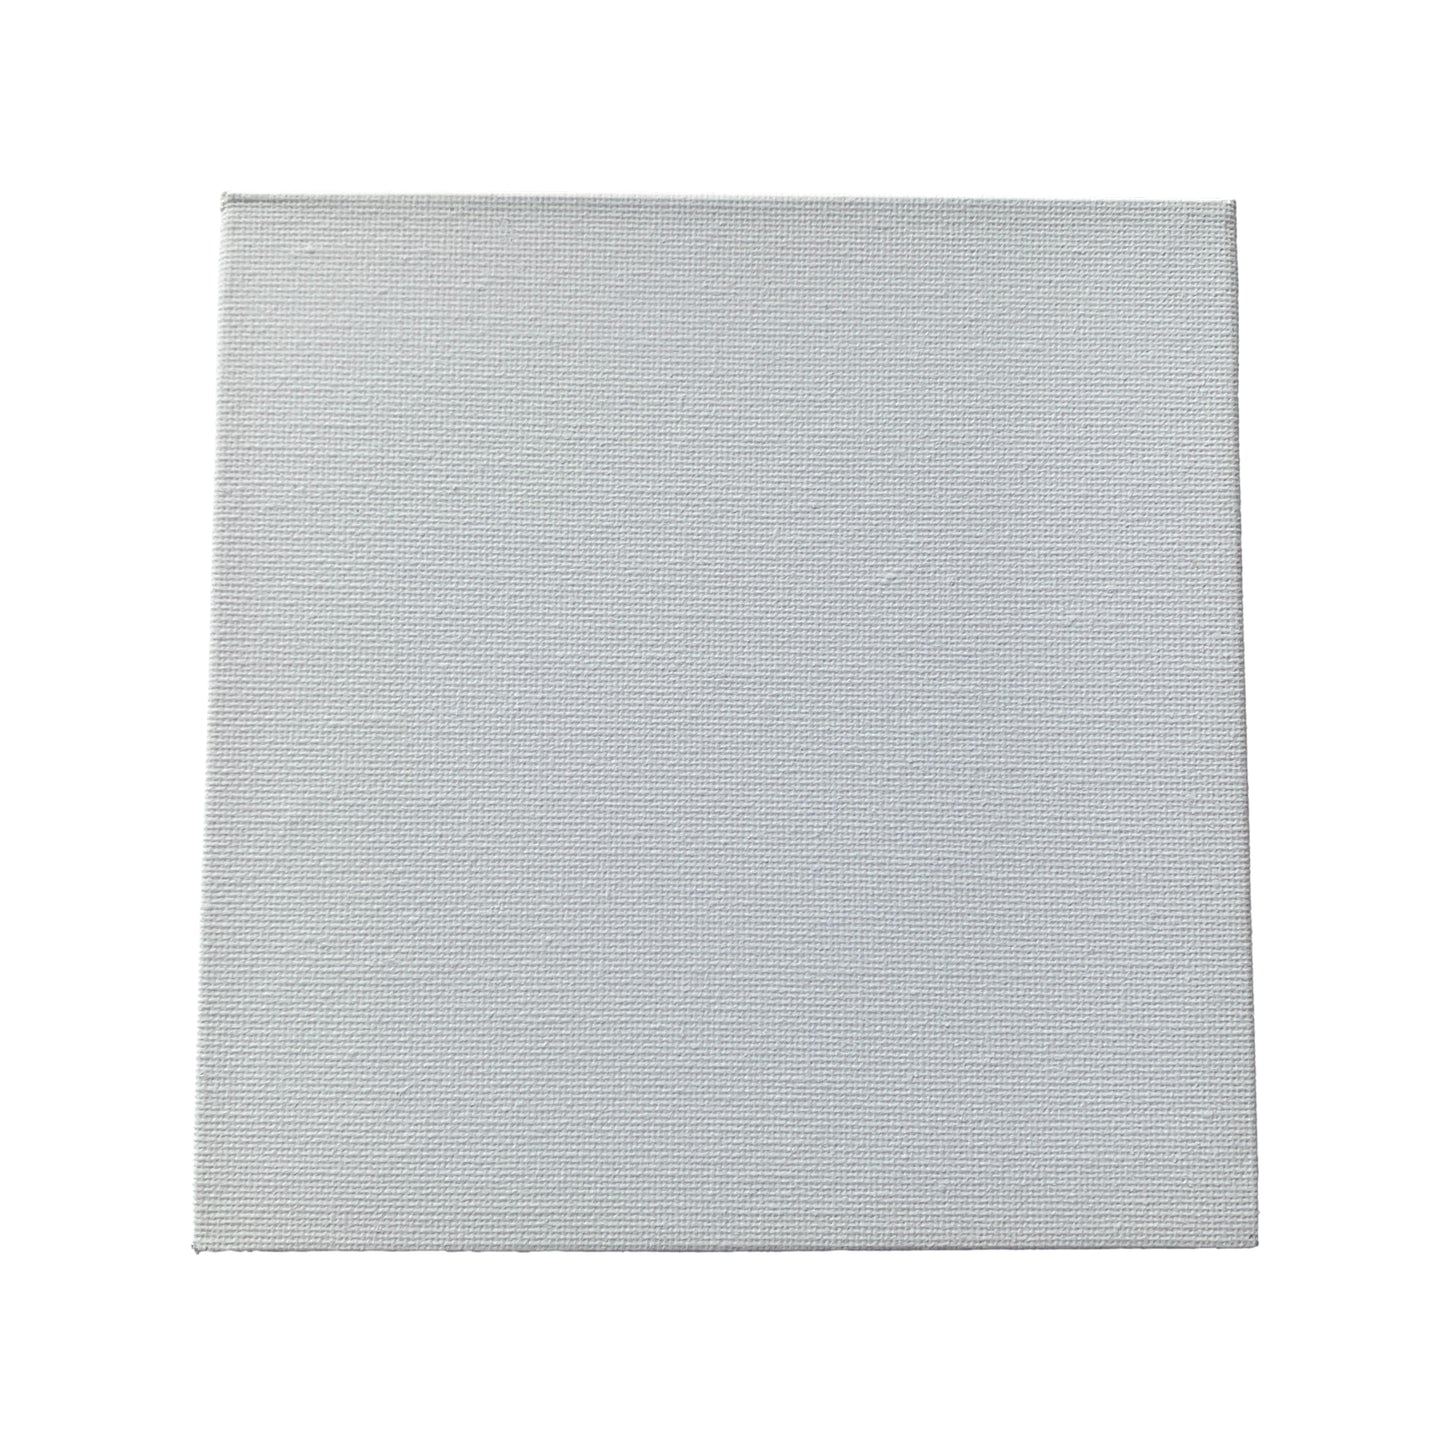 15x15cm Blank White Flat Stretched Board Art Canvas By Janrax